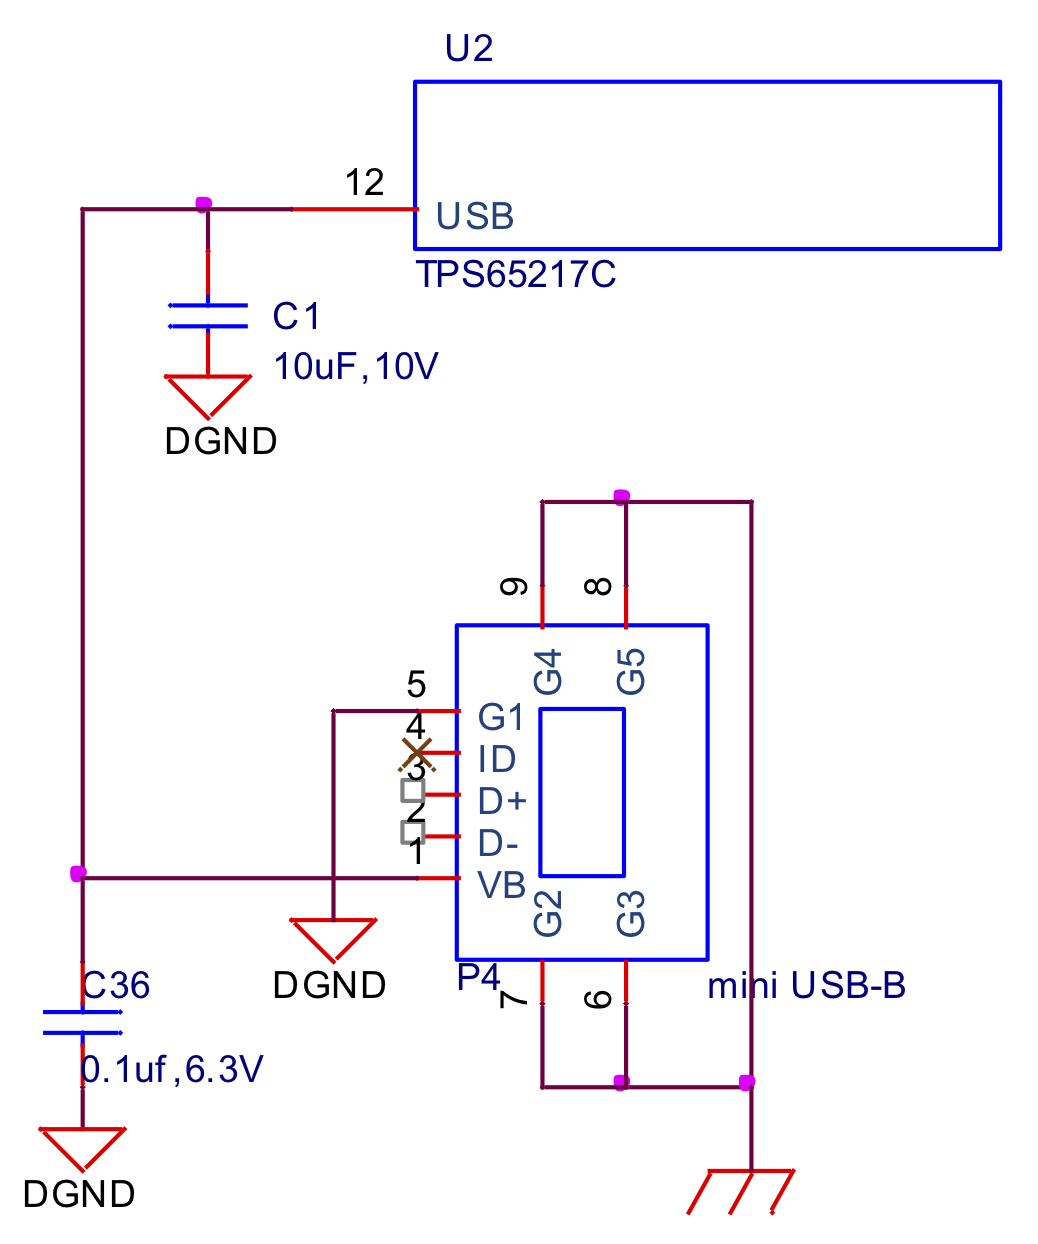 USB Power Connections